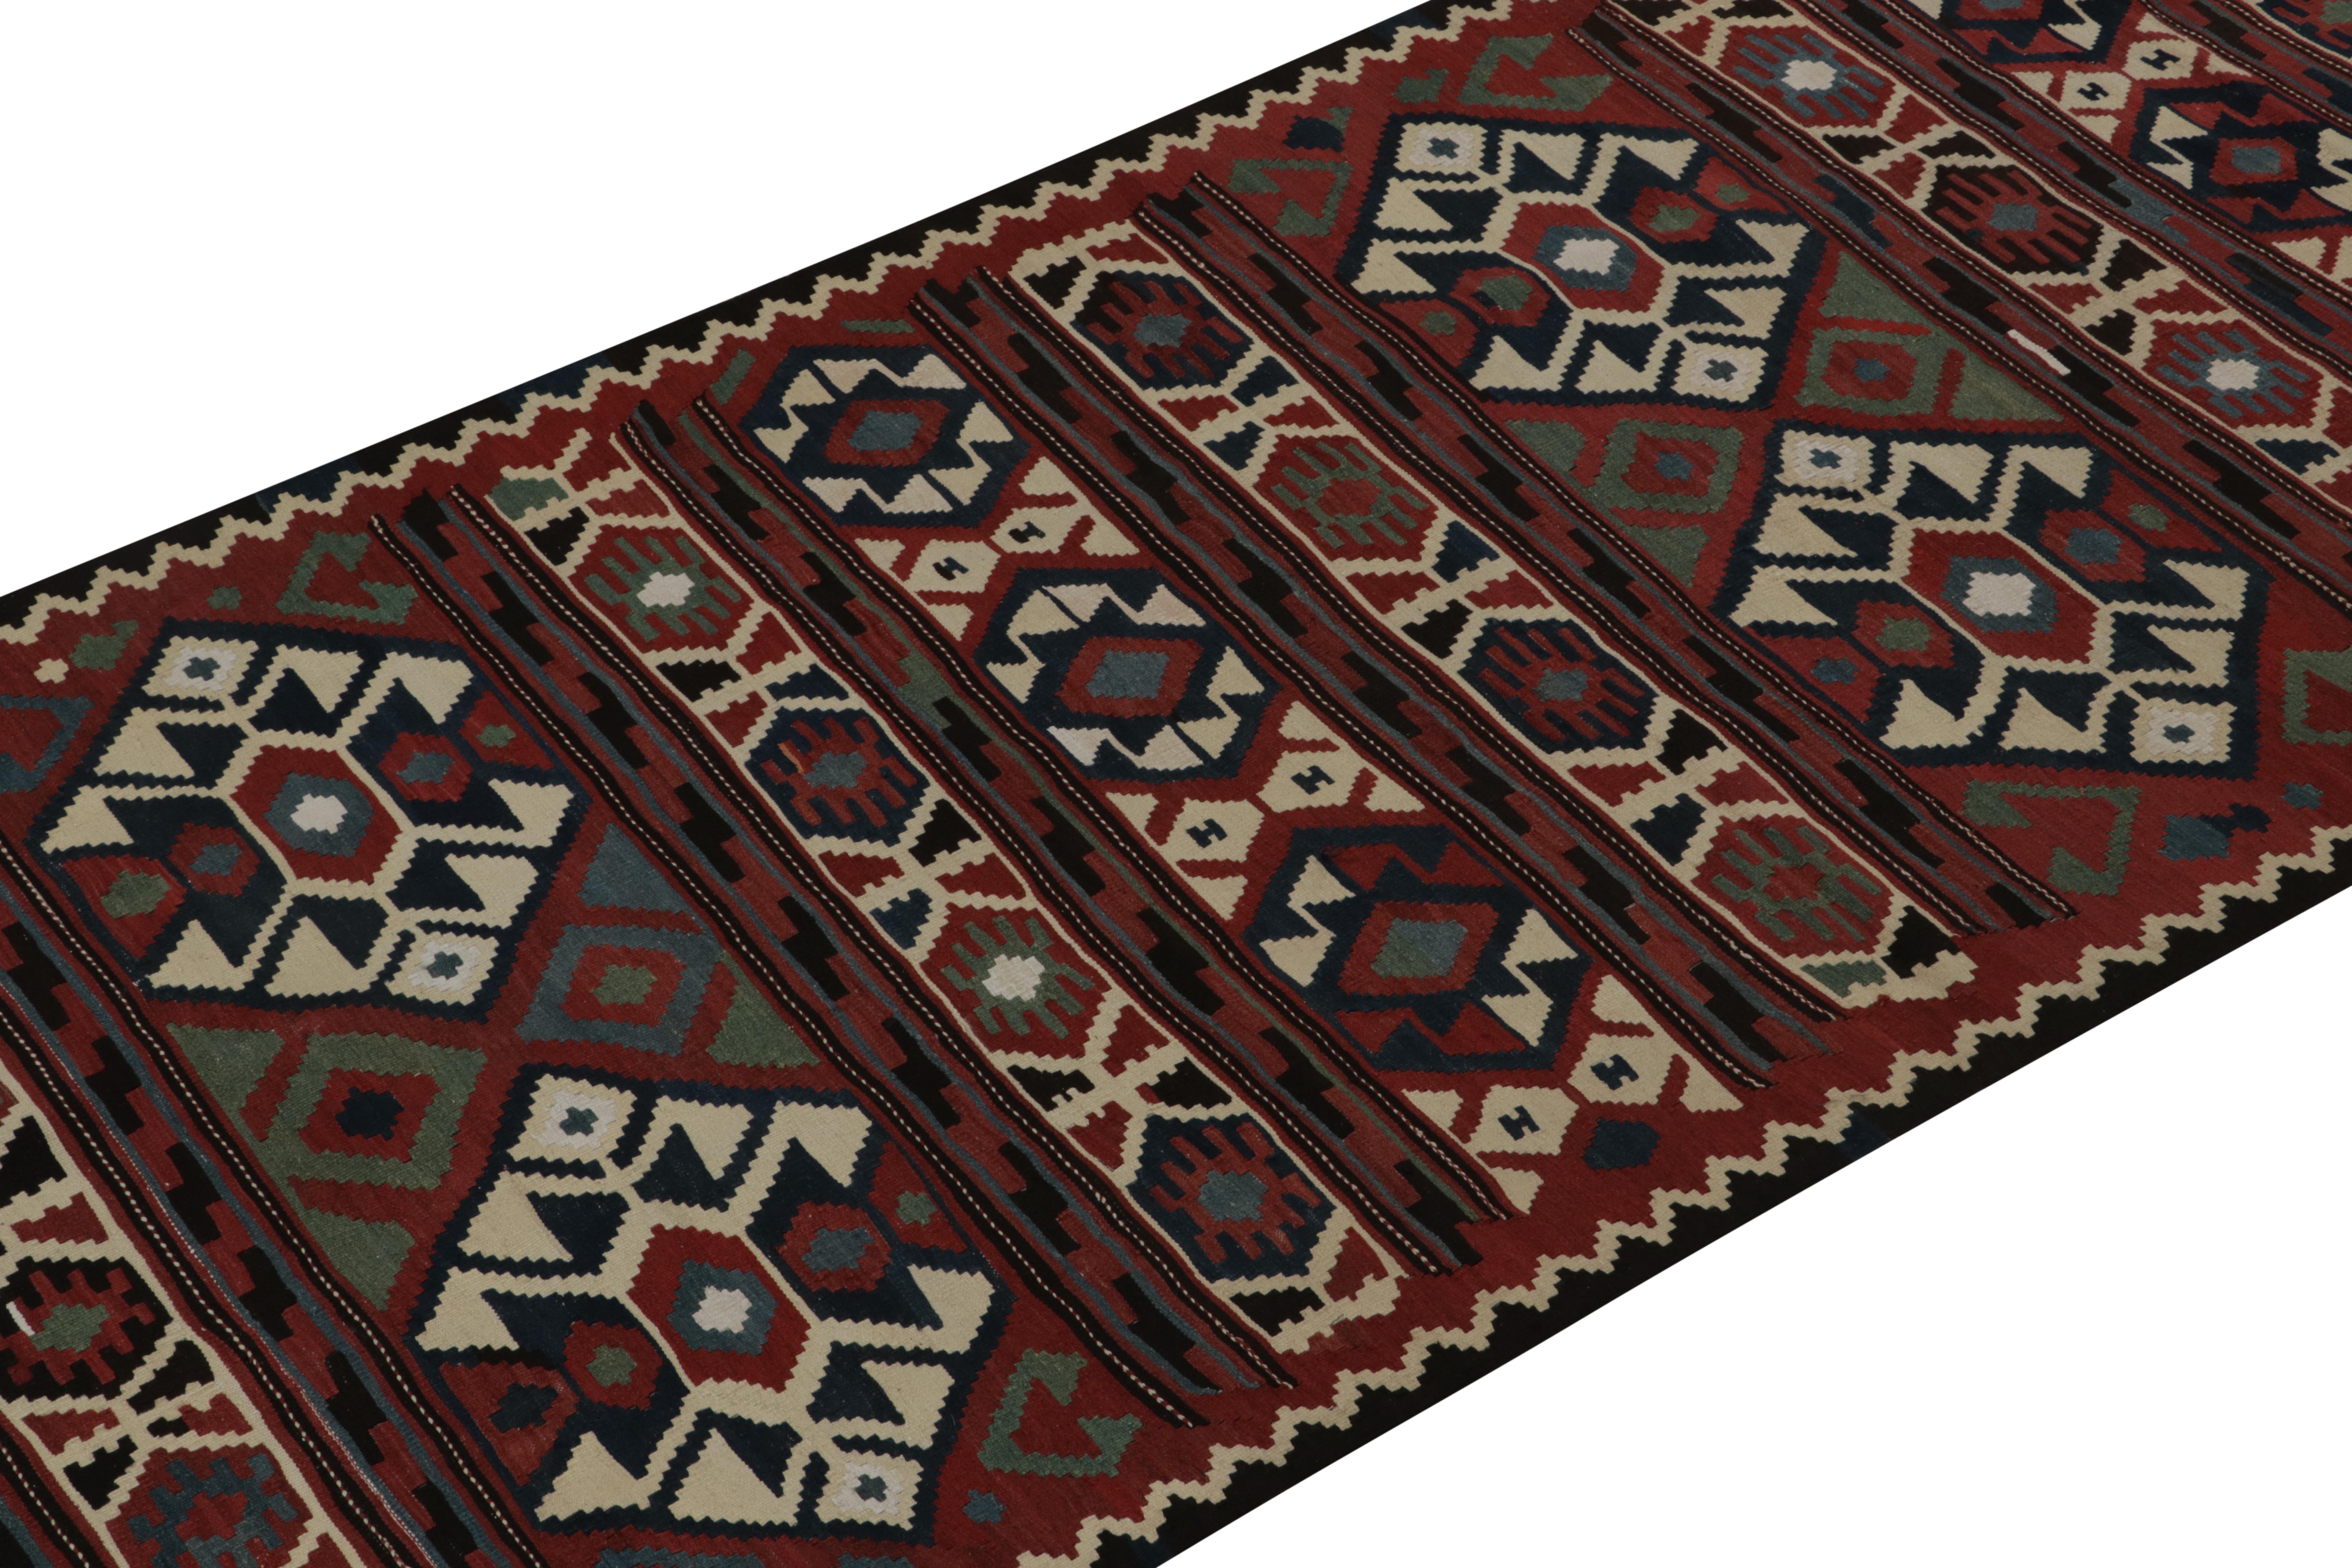 Extra-Long Vintage Persian Tribal Kilim with Geometric Patterns - by Rug & Kilim In Good Condition For Sale In Long Island City, NY